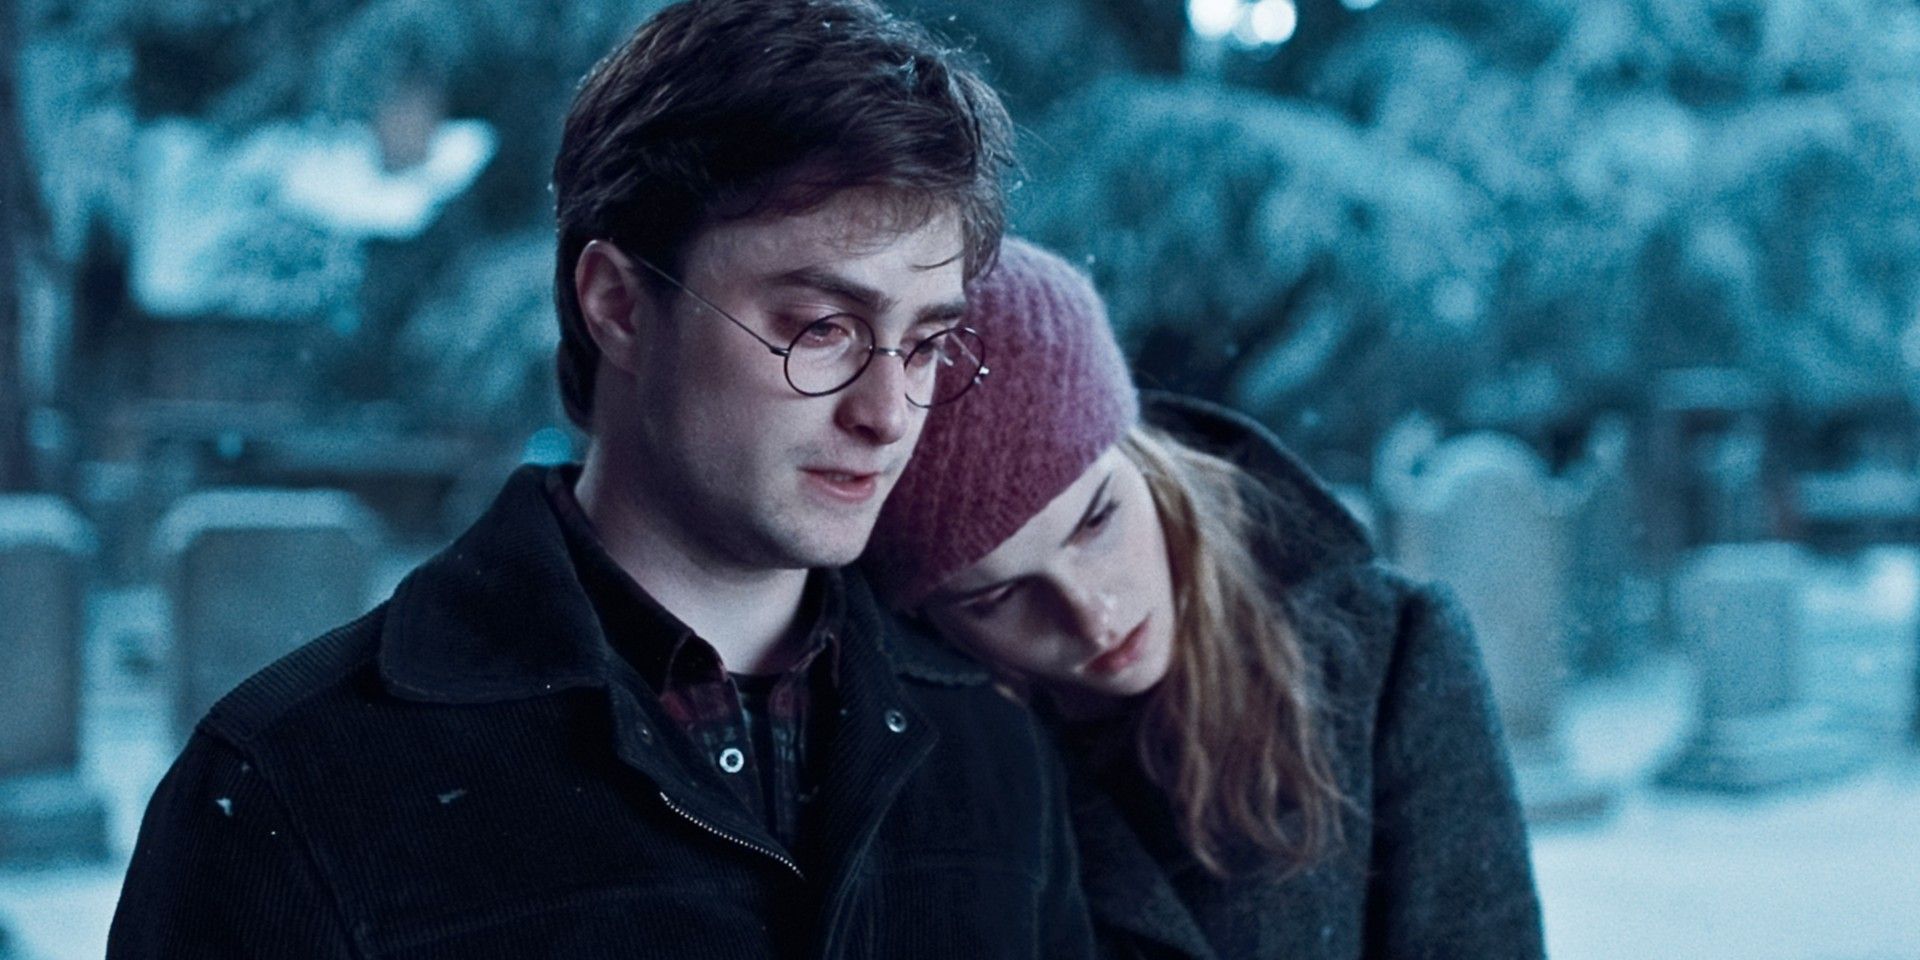 Harry and Hermione in Harry Potter and the Deathly Hallows Part 1